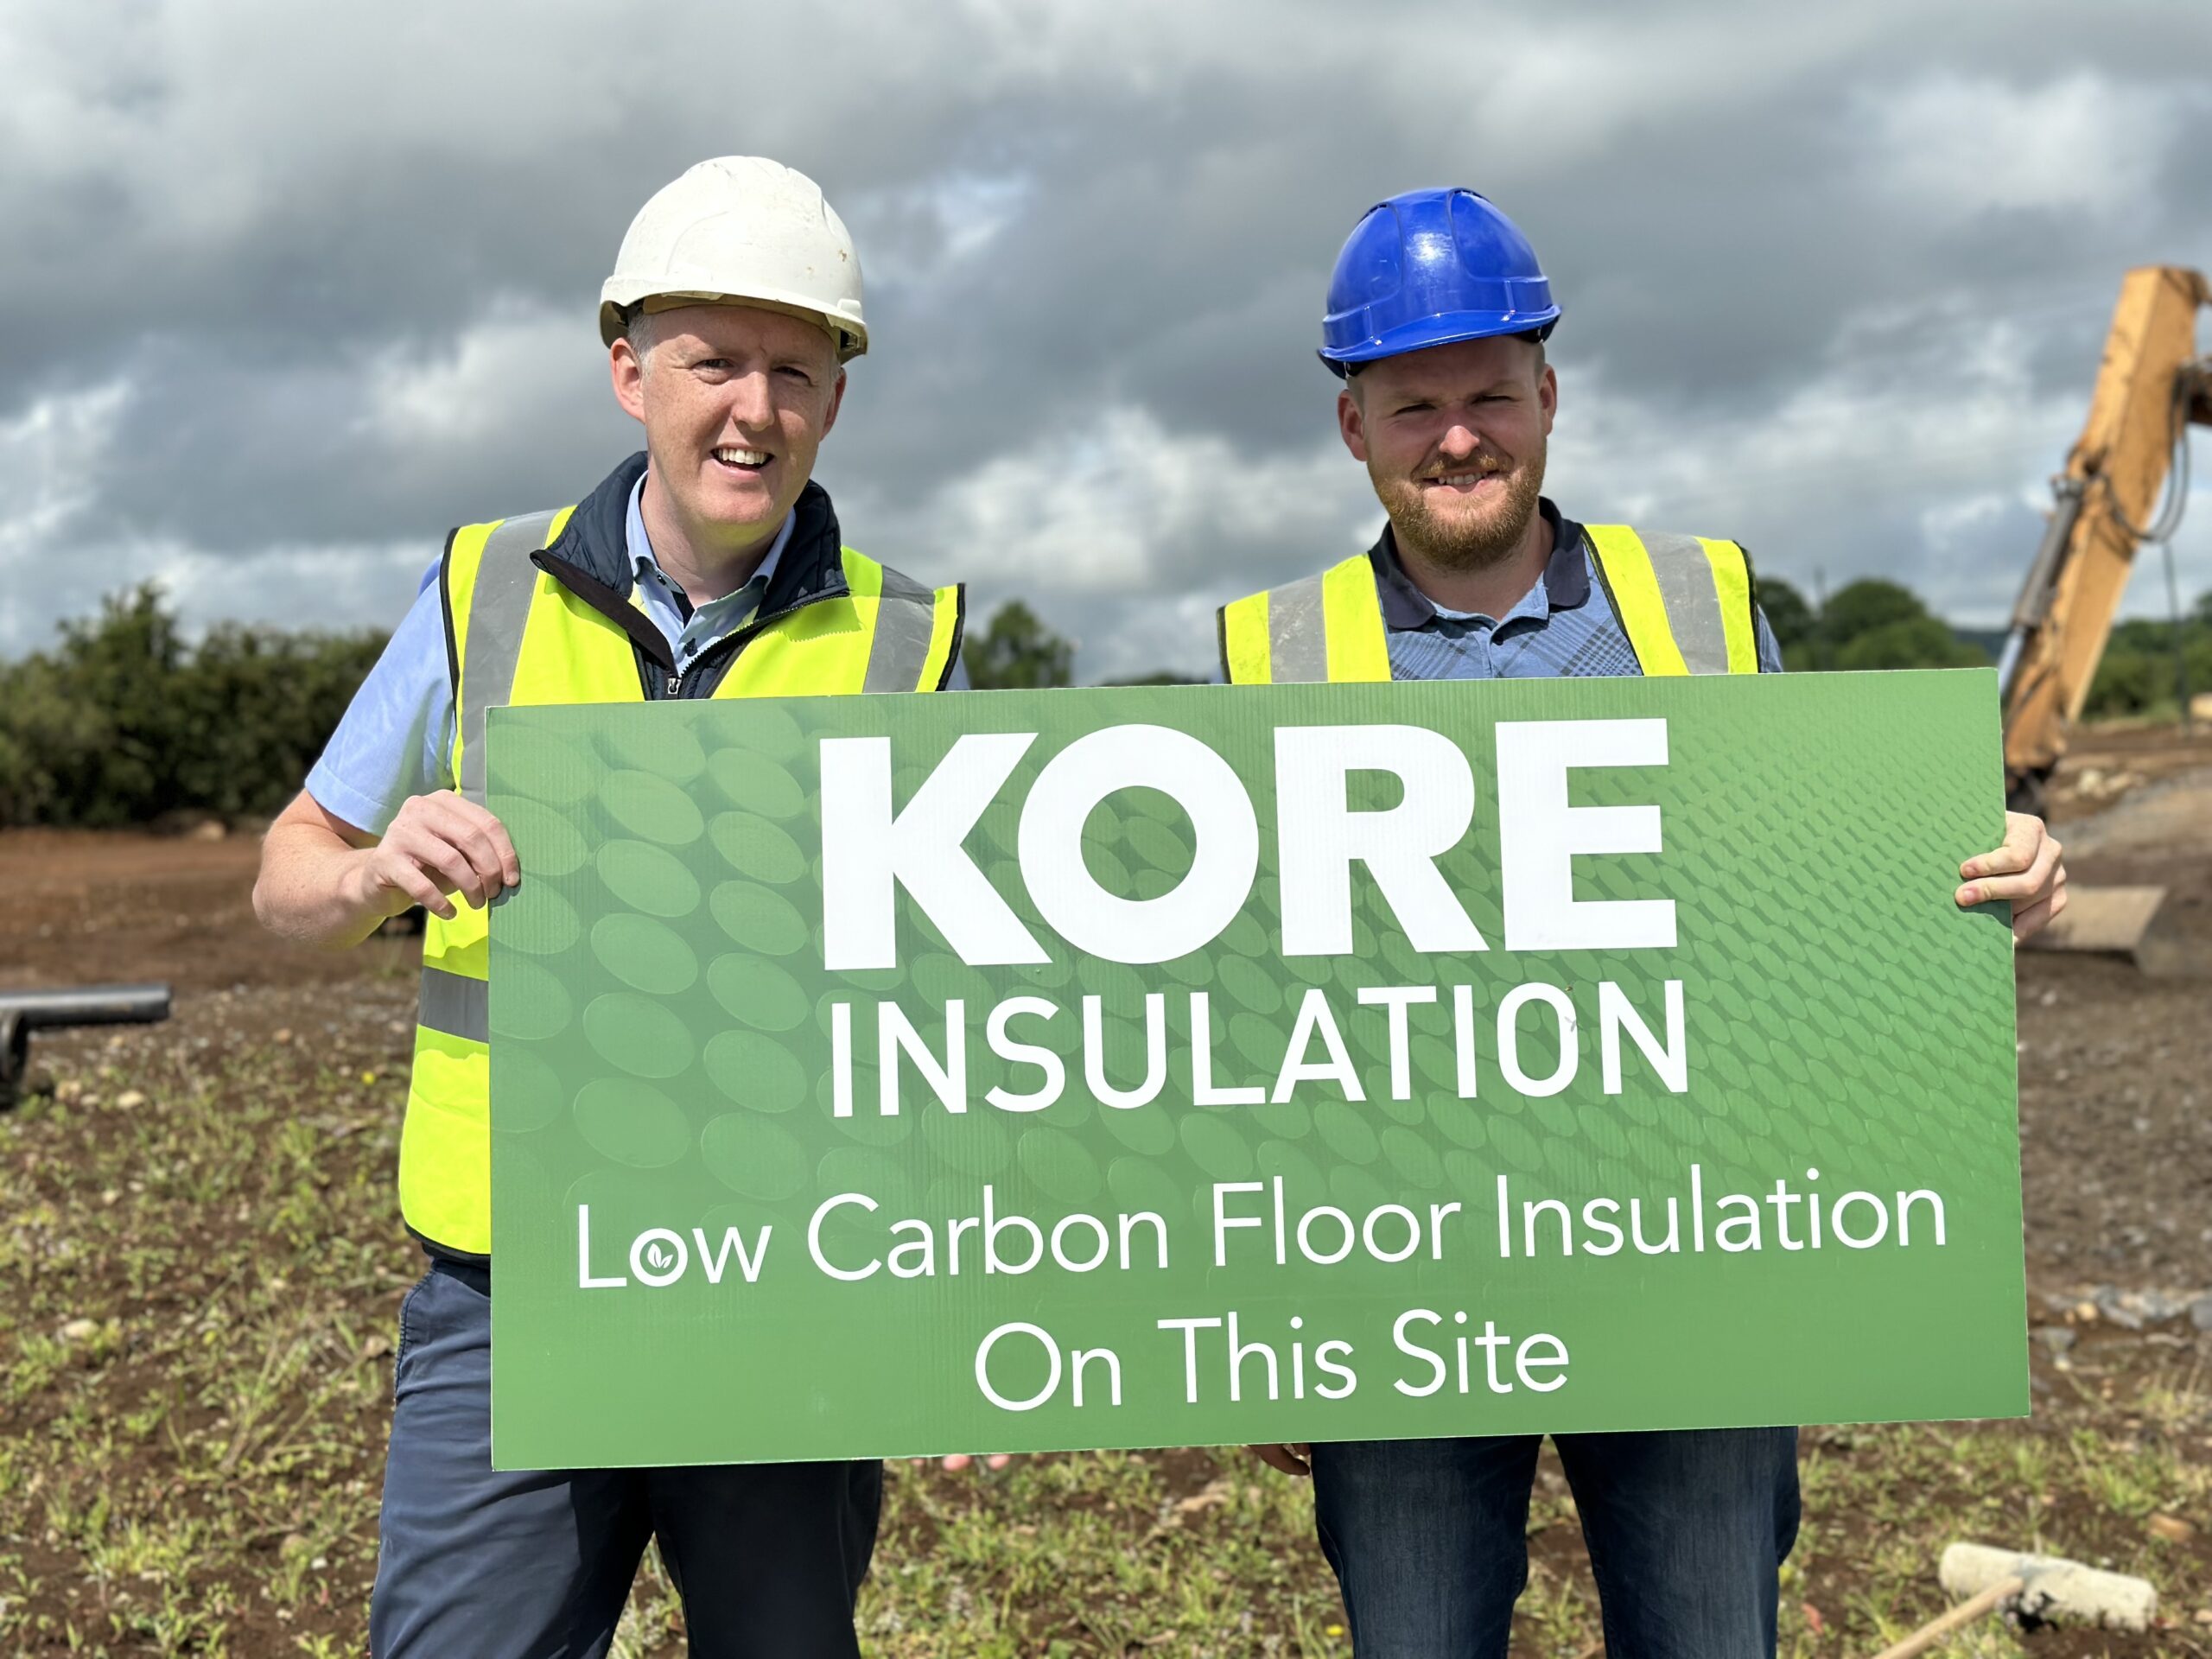 KORE Insulation and Braidwater Group On-site for Low Carbon Insulation product launch